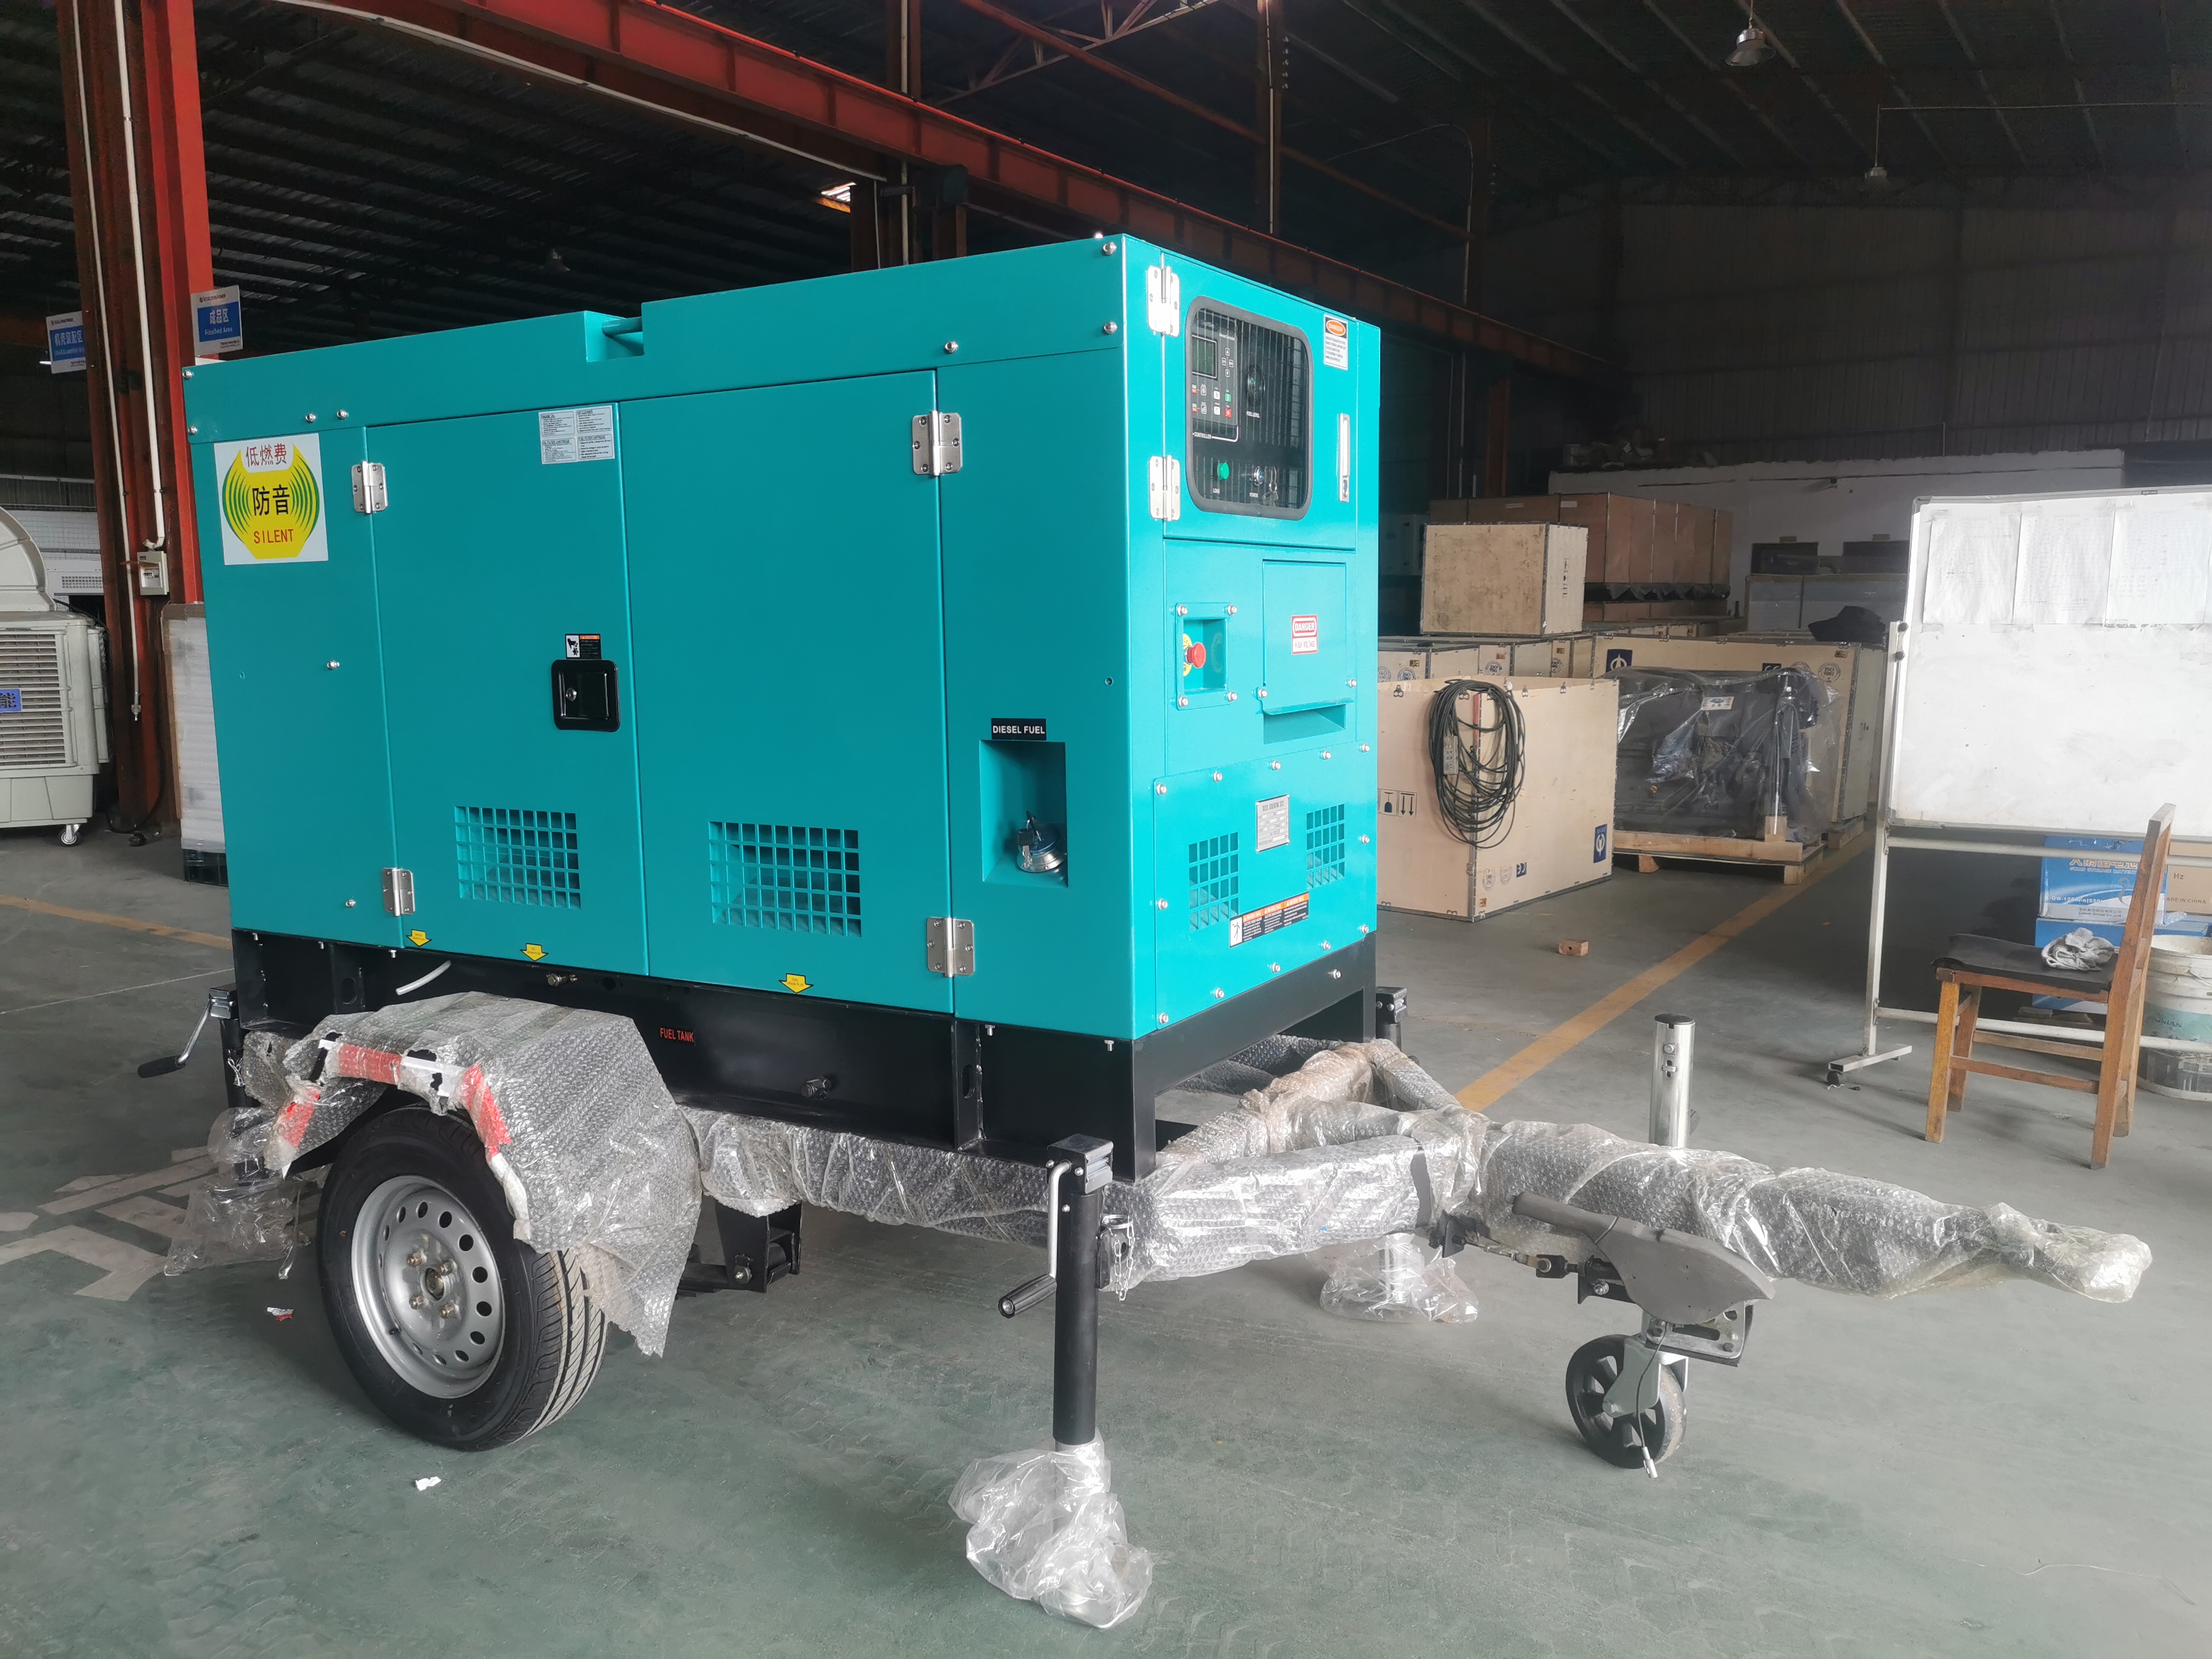 Four-stroke silent type genset with trailer